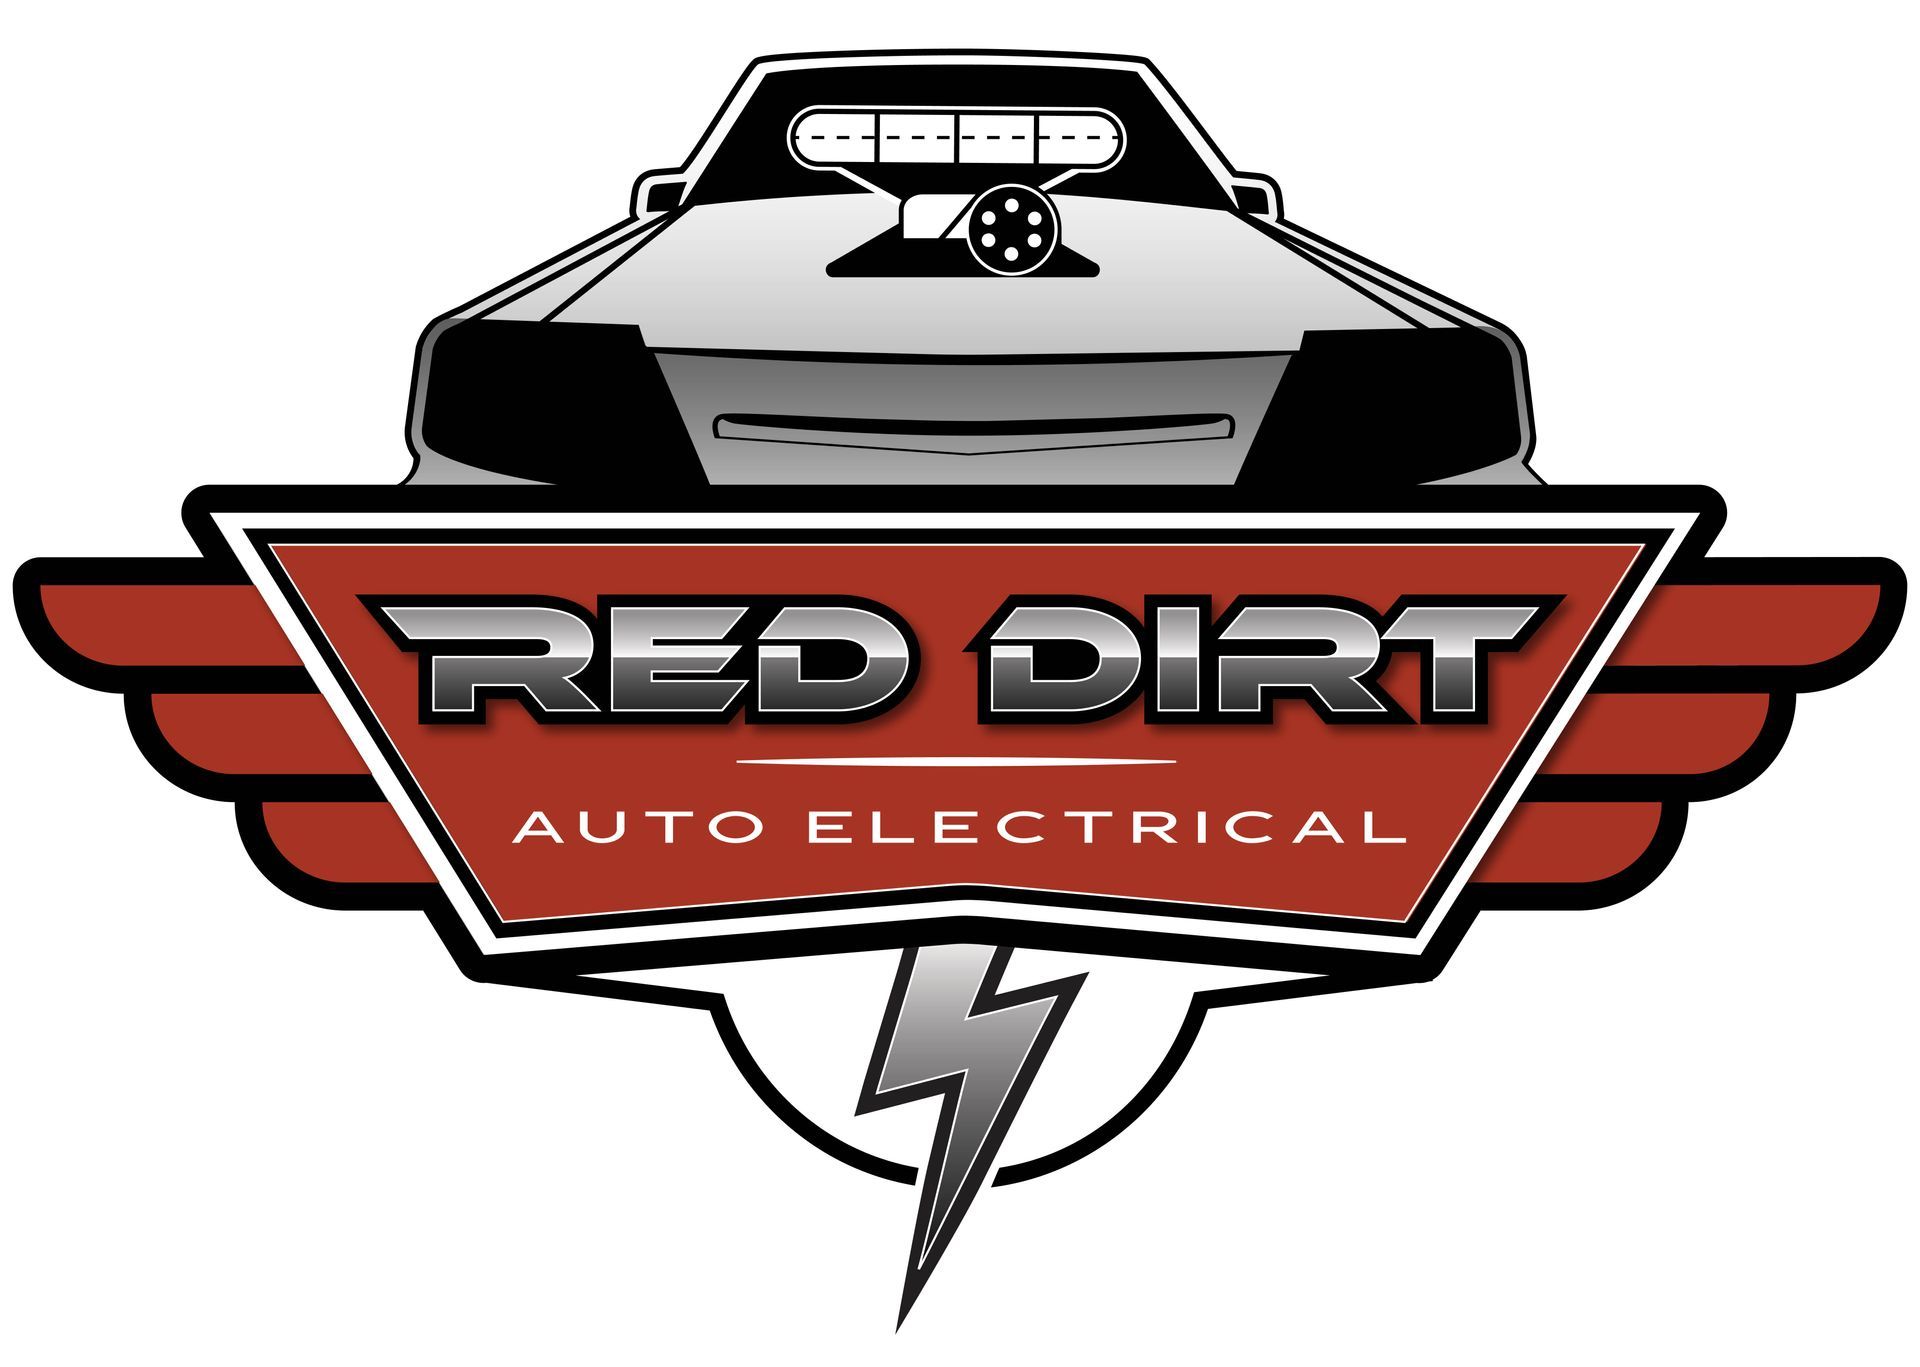 Red Dirt Auto Electrical logo